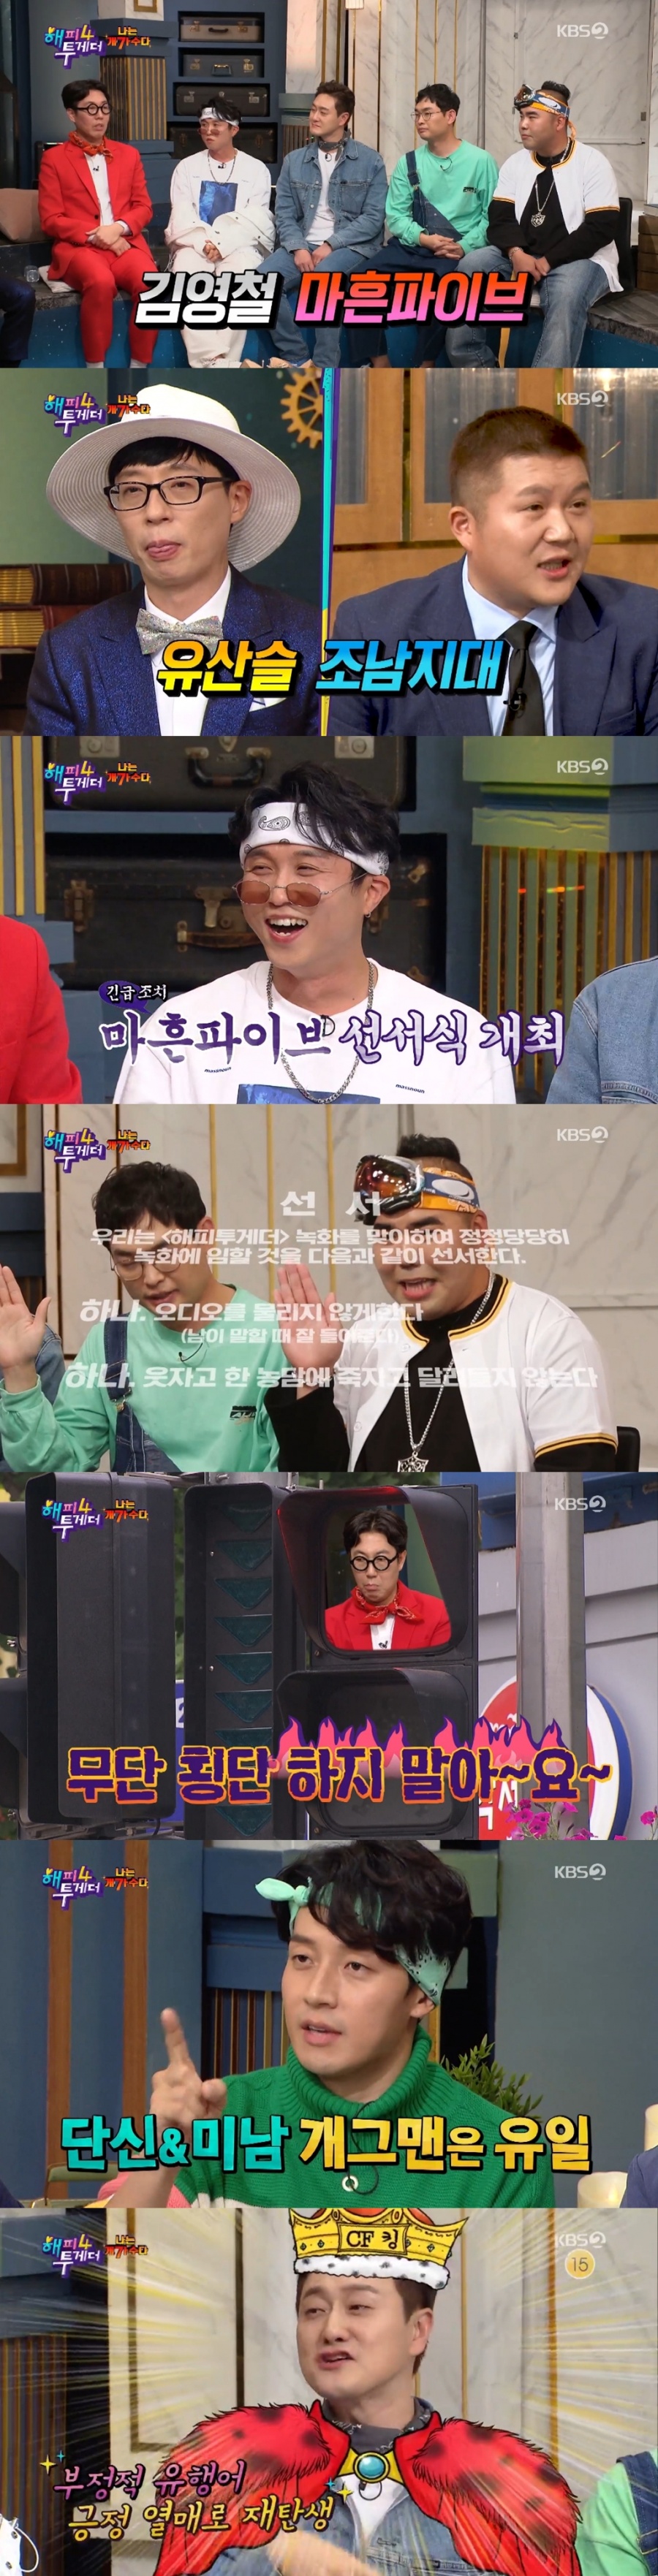 The Dogs took over Happy Together in their deeds.KBS2 Happy Together (hereinafter referred to as The Battle 4) aired on the 5th was featured in Im Dog with Kim Young-chul, Park Sung-Kwang, Wonhyo Kim, Park Young-jin, KIM Ji-ho and special MC Heo Kyung-hwan.The parade of comedians and singers gave a powerful smile.Kim Young-chul, who produces Legend videos every time he appears in Hattoo, played a big role in the broadcast.Kim Young-chuls basic volume exploded when he called because he wanted to see Yoo Jae-Suk.But the guest-five chatter was also a formidable one, and the Battle 4 broadcast quickly turned into a talk wild.Nine entertainers, including guests and The Battle 4 MC Yoo Jae-Suk, Jeon Hyun-moo, and Jo Se-ho, do not bite the audio, do not rush to die in a joke to laugh, do not hurt your co-workers gag,  I promised by oath.But the order of the oath was also brief: their laughter greed gradually broke the rules.In particular, Kim Young-chul explained his new song Traffic Light, while he showed his own chitky Boa, Yang Hee Eun and Ha Chun Hwas song in succession.He also showed a stage where laughter and excitement came together by using the latest equipment that changes the lighting manually even in the lights stage.The special MC Heo Kyung-hwan and Park Sung-Kwang, Wonhyo Kim, Park Young-jin and KIM Ji-ho formed the form of Forty-five.They also presented the dance version Twenty-Forty, and the fashion parade as a gag concert Legend comedian.The buzzwords that come to mind every time I listen to them and the birth of buzzwords still gave the viewers a navel.Among them, the visual controversy of Heo Kyung-hwan, the visual manager, gave a big smile.Park Sung-Kwang denied his visuals, saying, Heo Kyung-hwan face is a face that should be taller.However, Heo Kyung-hwan said, Gagman should not overlap characters.There are tall, ugly comedians, tall and handsome comedians, but I am the one who is tall and handsome. In addition, the battle of Dogs by Yoo Jae-suk, Jo Se-ho, Kim Young-chul and Forty-five in the Jonam area was also a laughing point.Forty-five, who met Kim Young-chul and EXO, BTS of Dog system, continued to make confrontational compositions such as high-pitched confrontation and sound source confrontation.The Dog, which only thinks about the laughter of the audience, gathered together, and there was a bigger smile.Because there are entertainers who only think about laughter and try to meet them, The Battle 4 is filled with rich fun on Thursday night of viewers.In the future, expectations are added to what special feature The Battle 4 will capture viewers.The magical Thursday night with the best stars, KBS2 Happy Together is broadcast every Thursday at 11:10 pm.